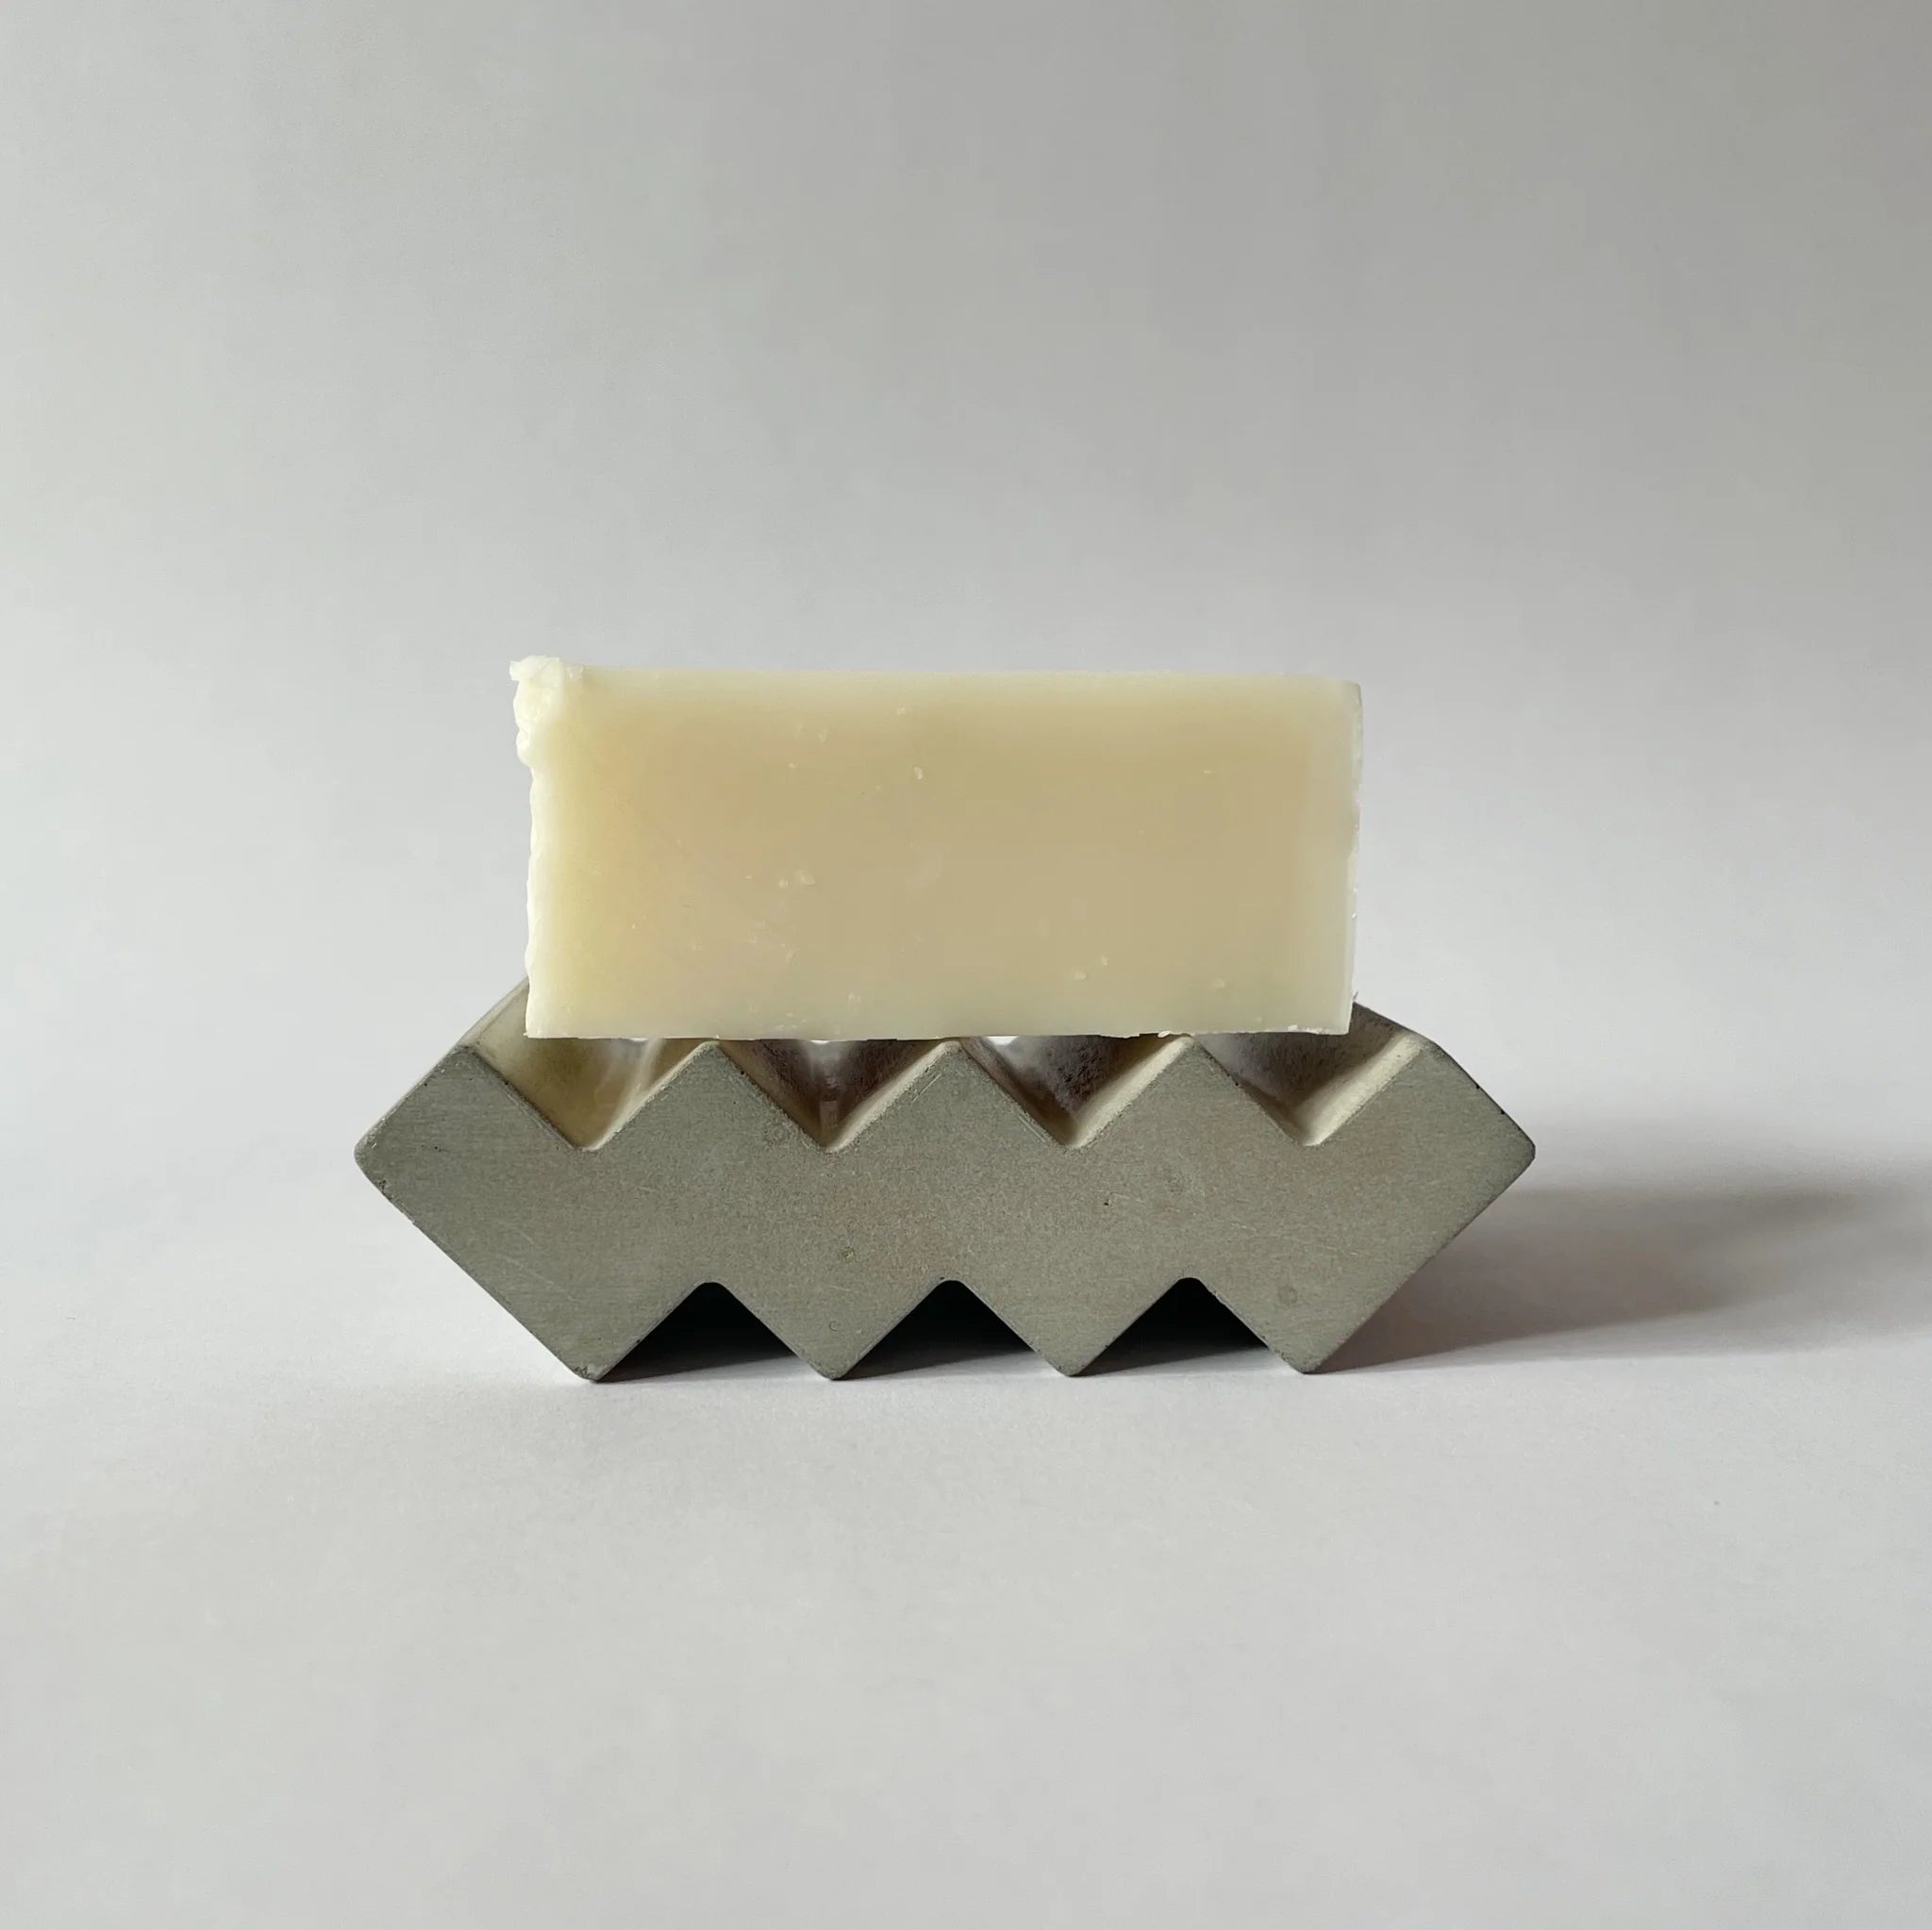 Grey soap dish made of cast concrete. Zig zag in shape, it's solid and waterproof 